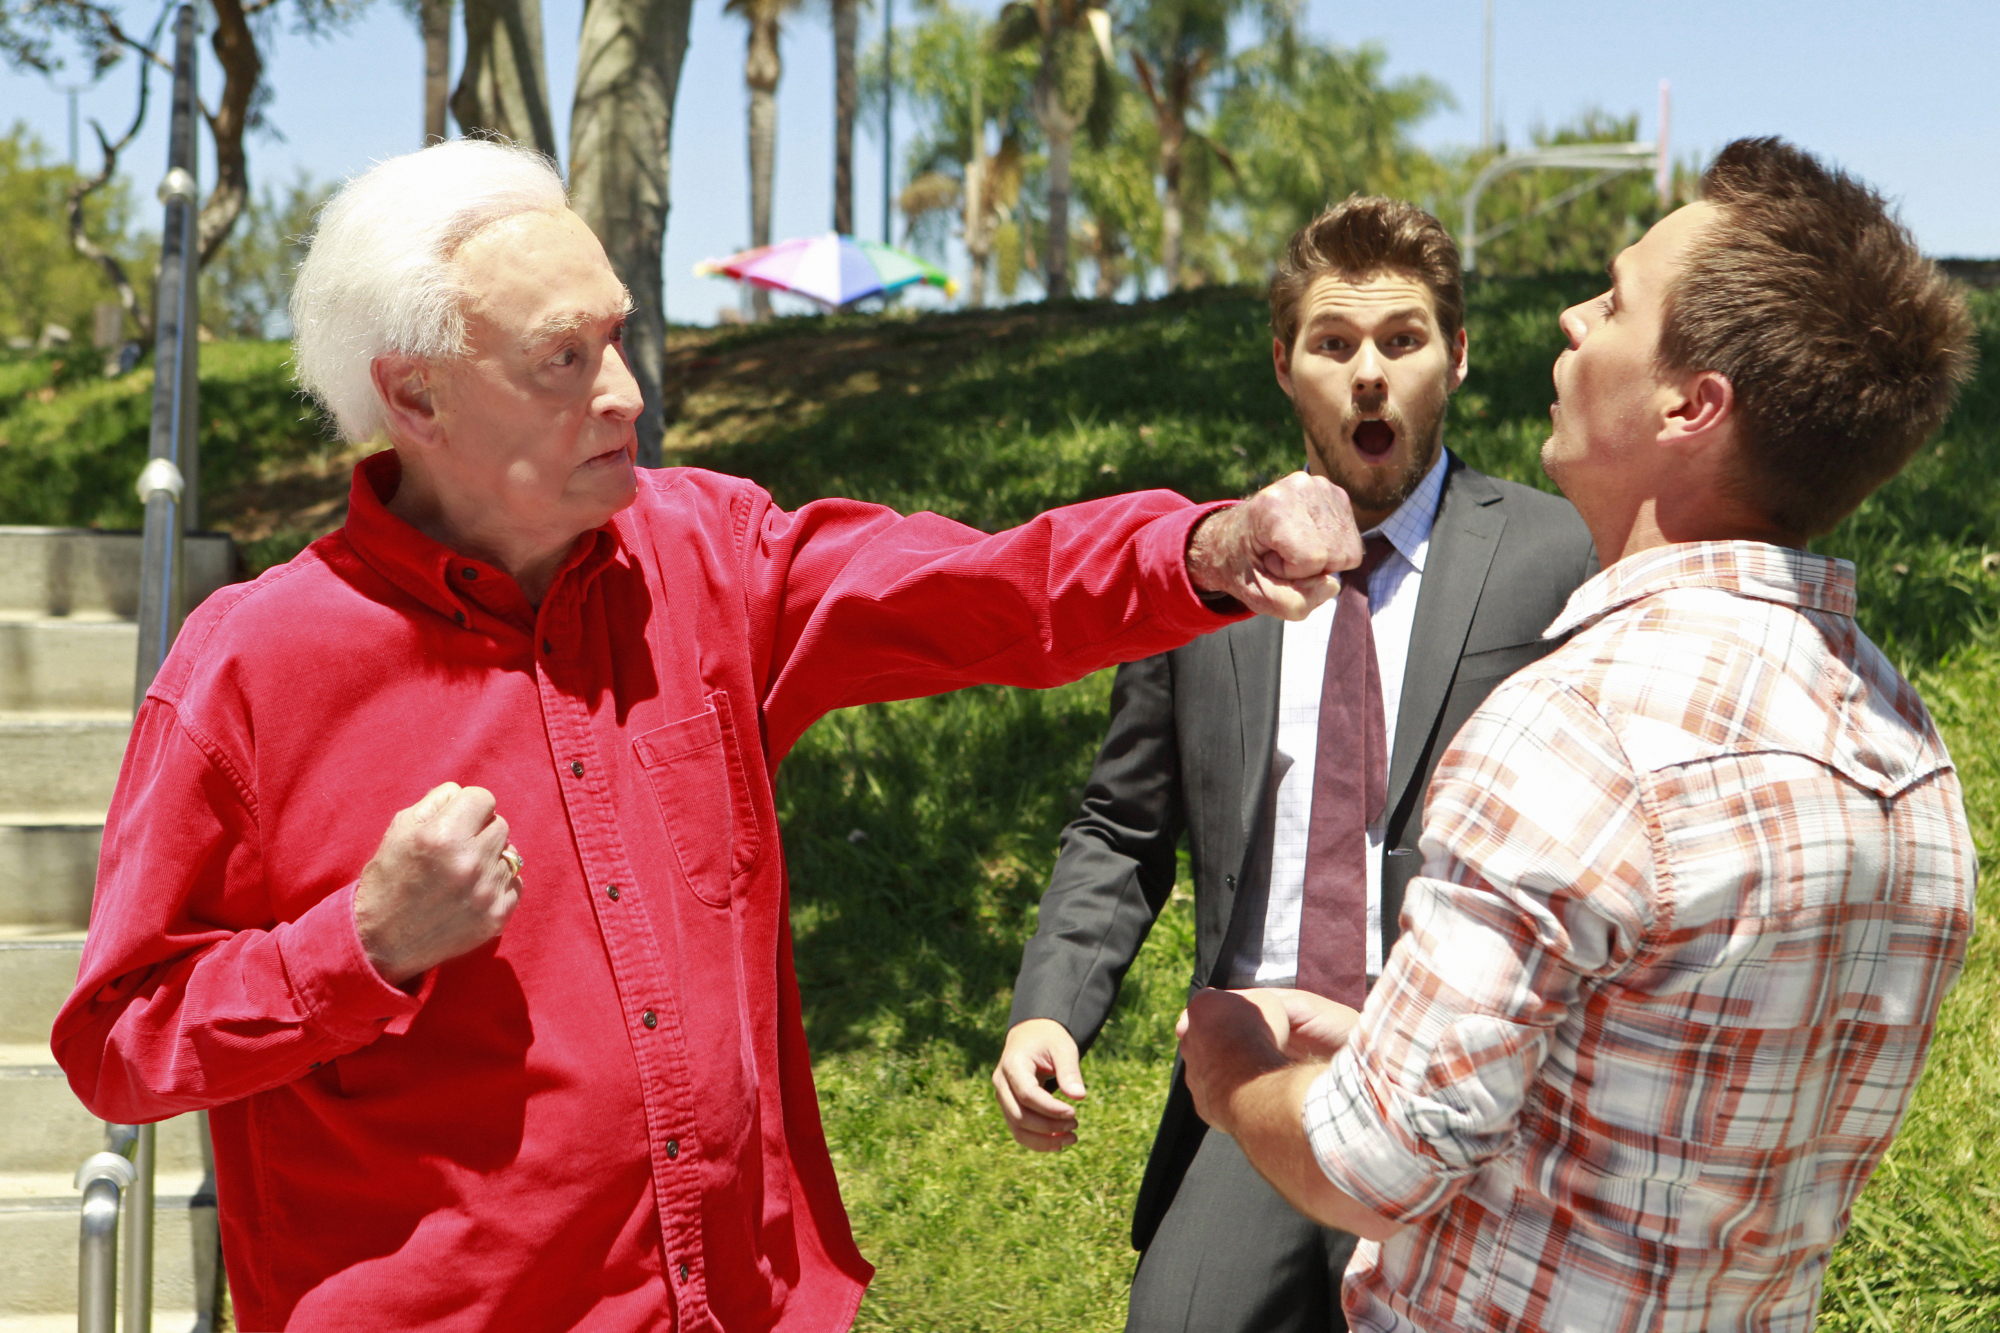 Bob Barker in "The Bold and The Beautiful" on August 5, 2014. | Source: Getty Images